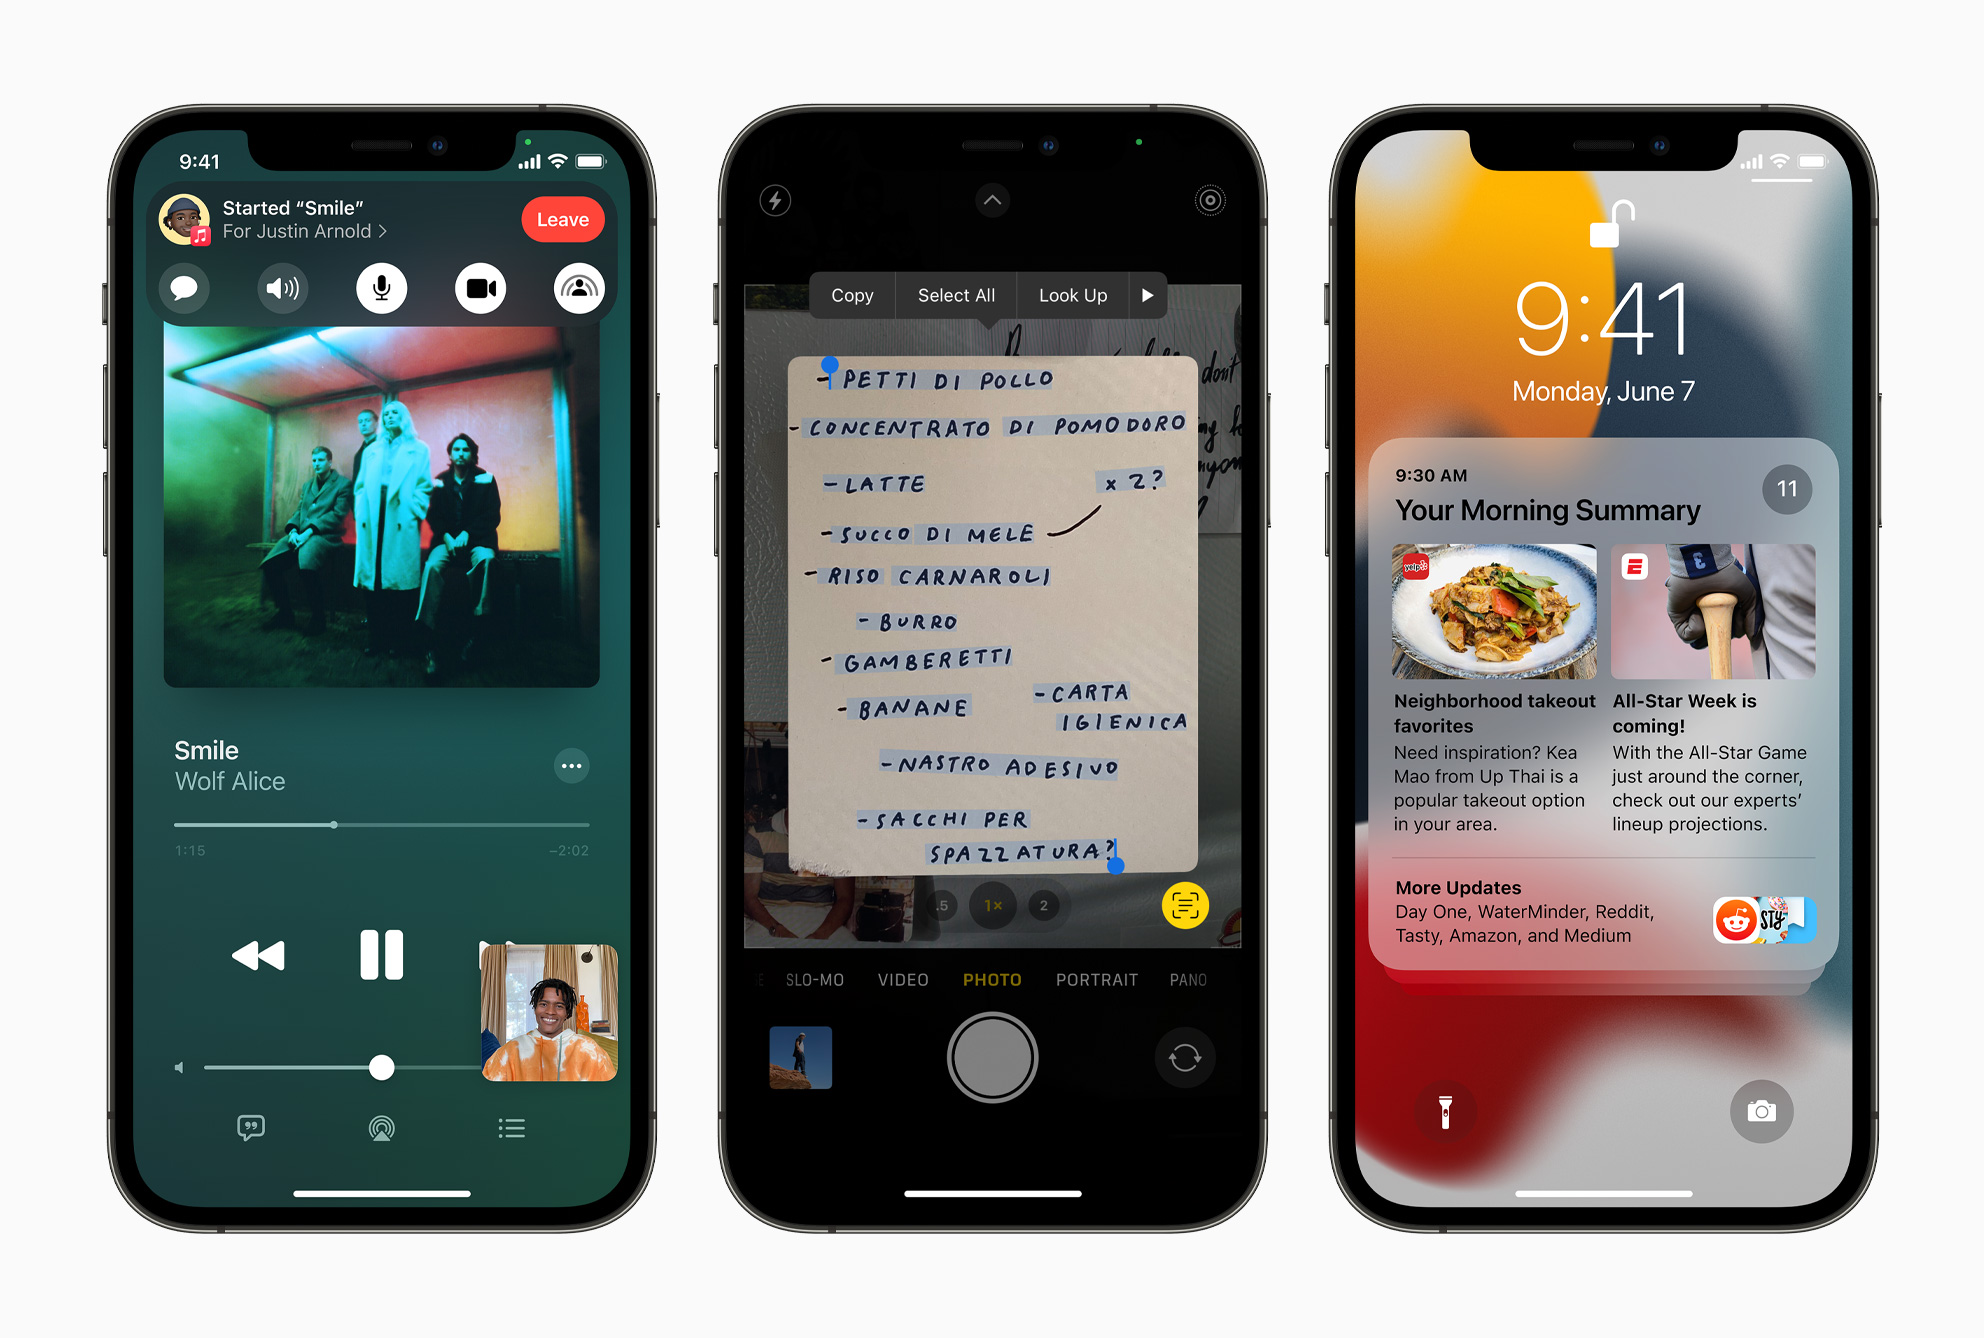 Here’s what’s coming in iOS 15: SharePlay, FaceTime, Focus modes, LiveText, and more